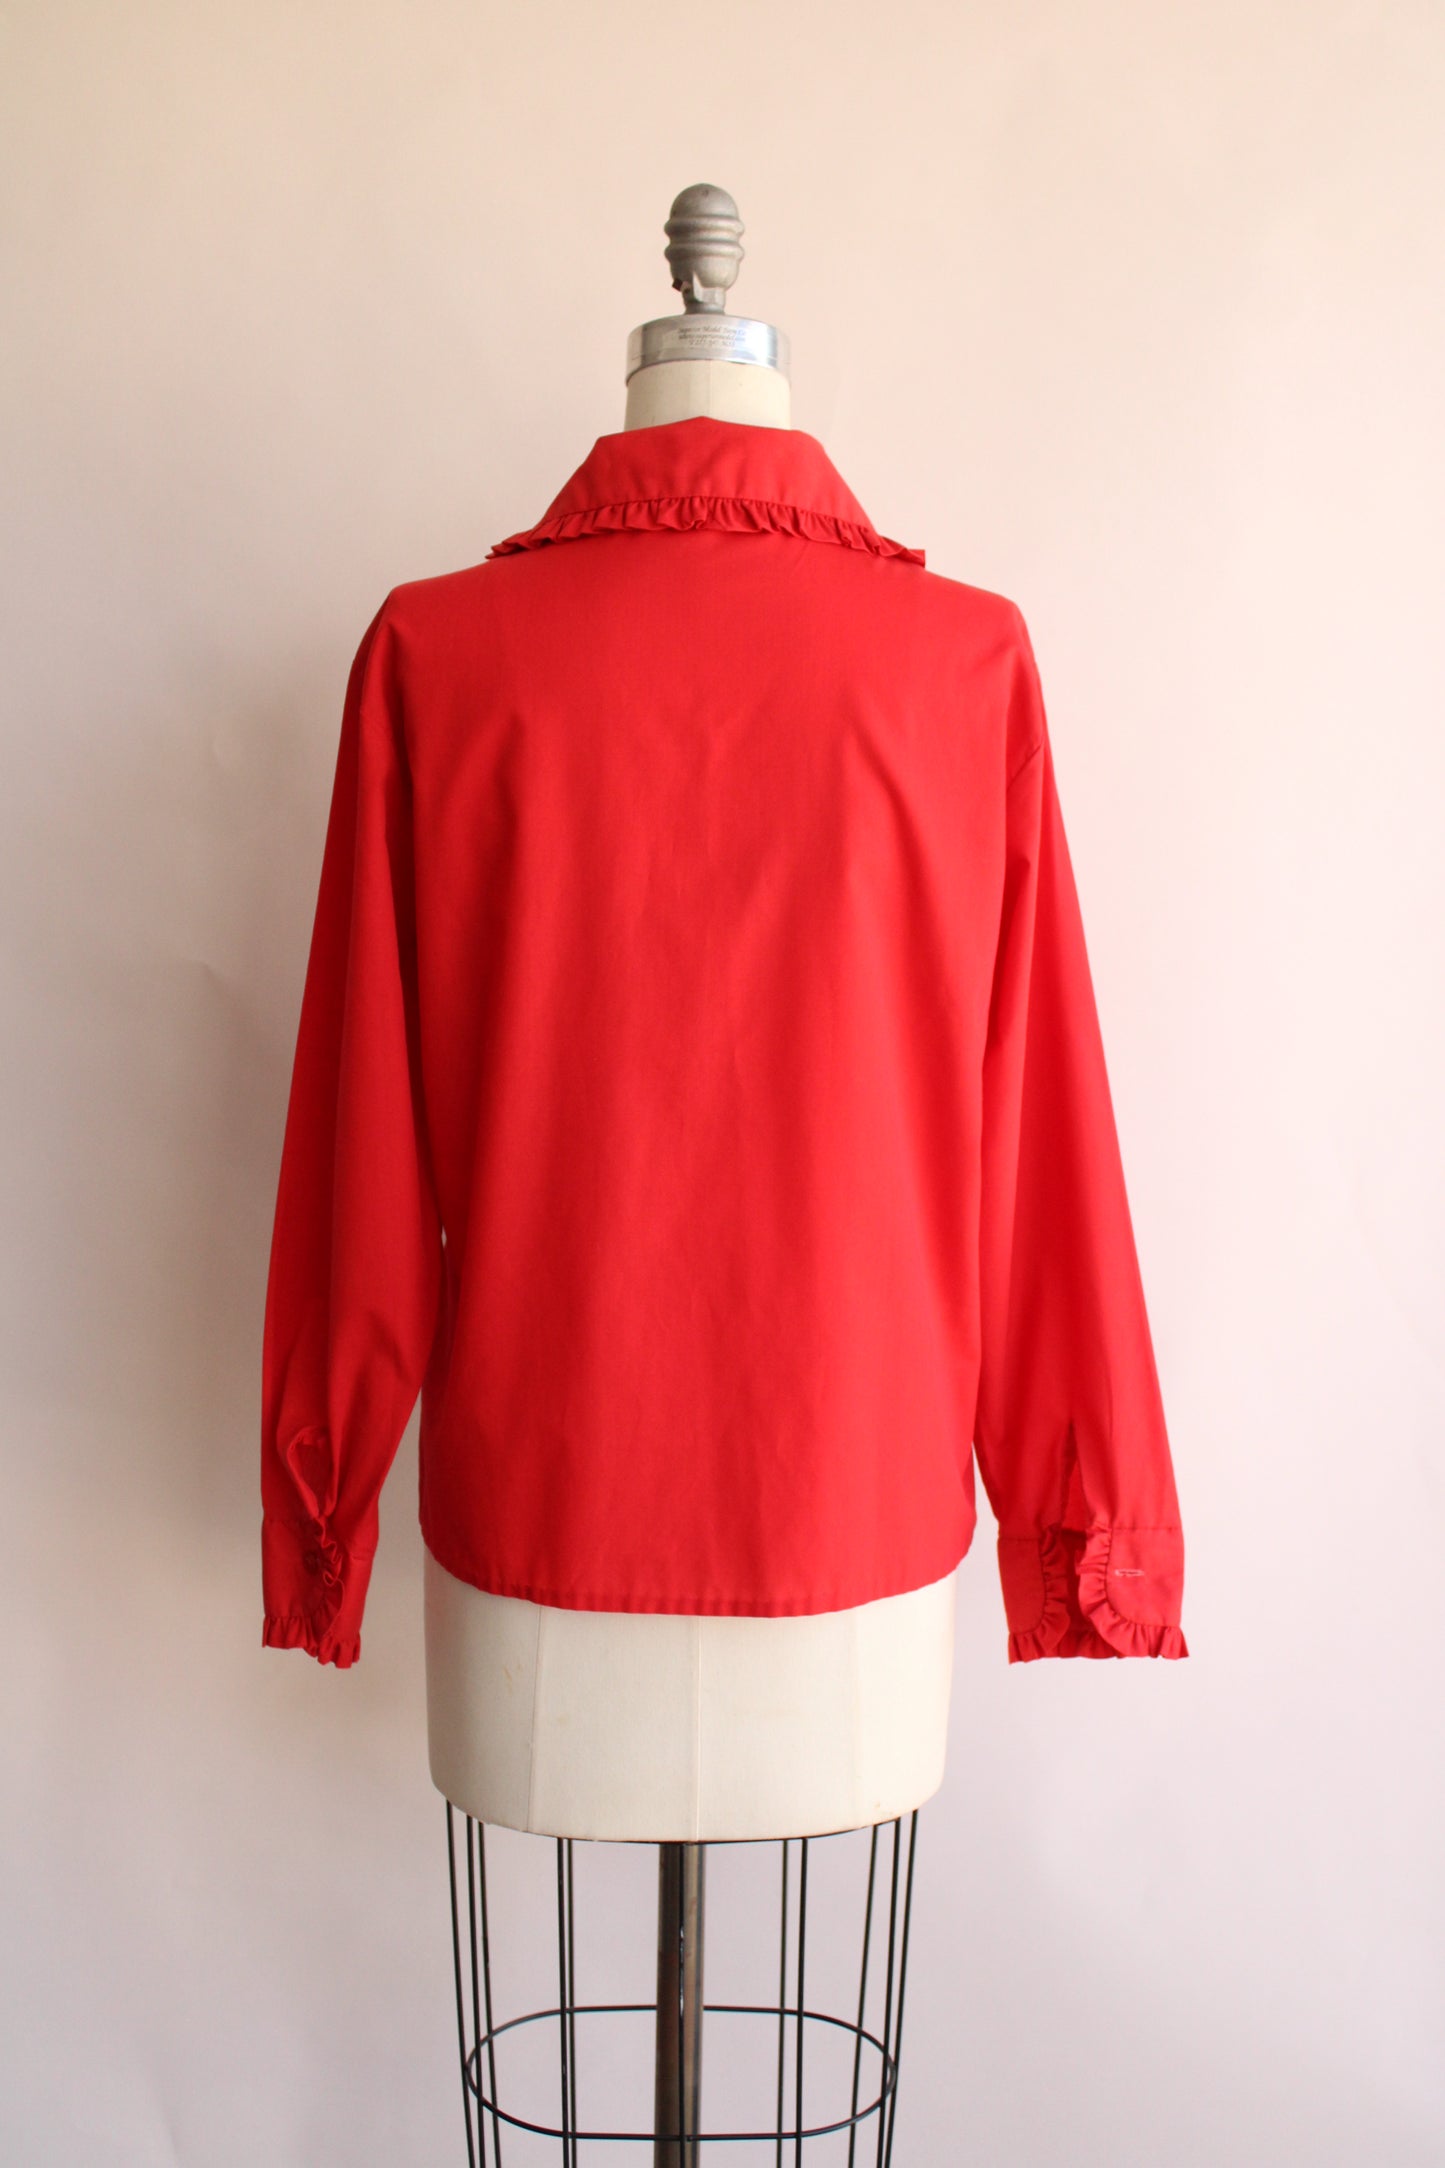 Vintage 1970s Lady Marlboro Red Button Up Shirt with Ruffled Collar